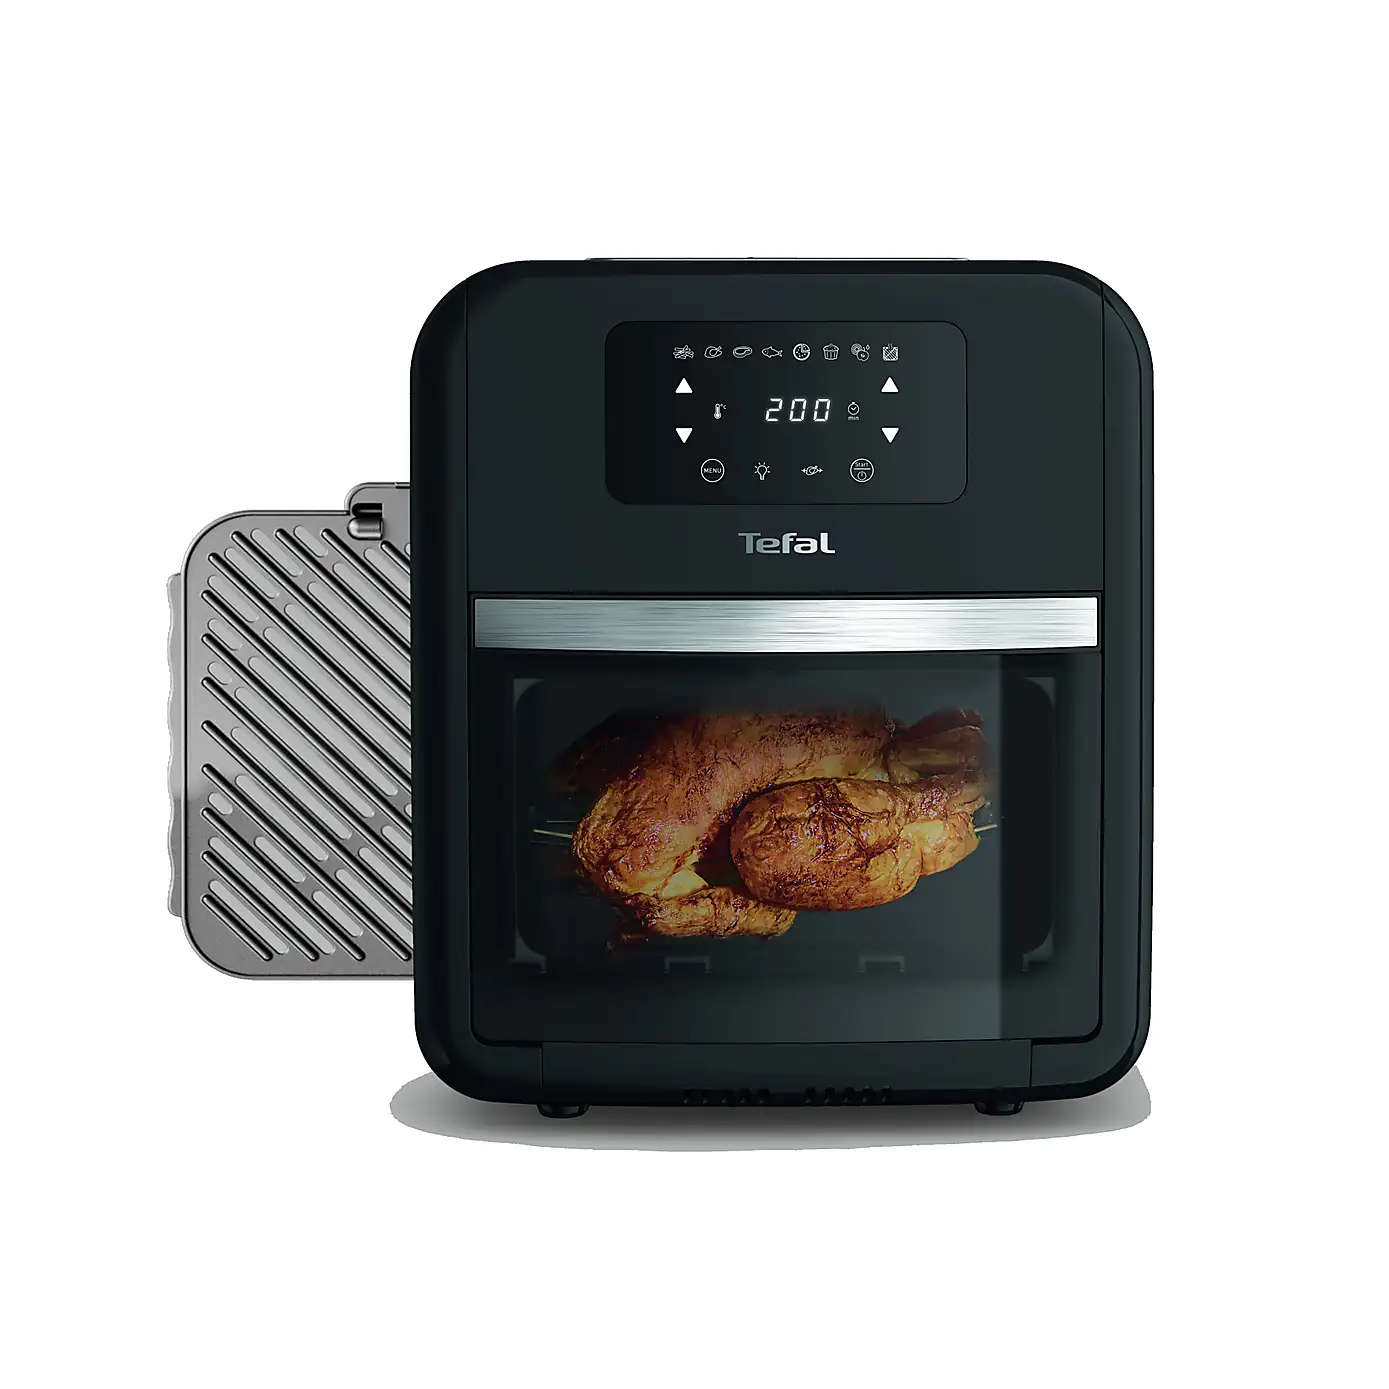 tefal easy fry oven grill 9-in-1 air fryer review